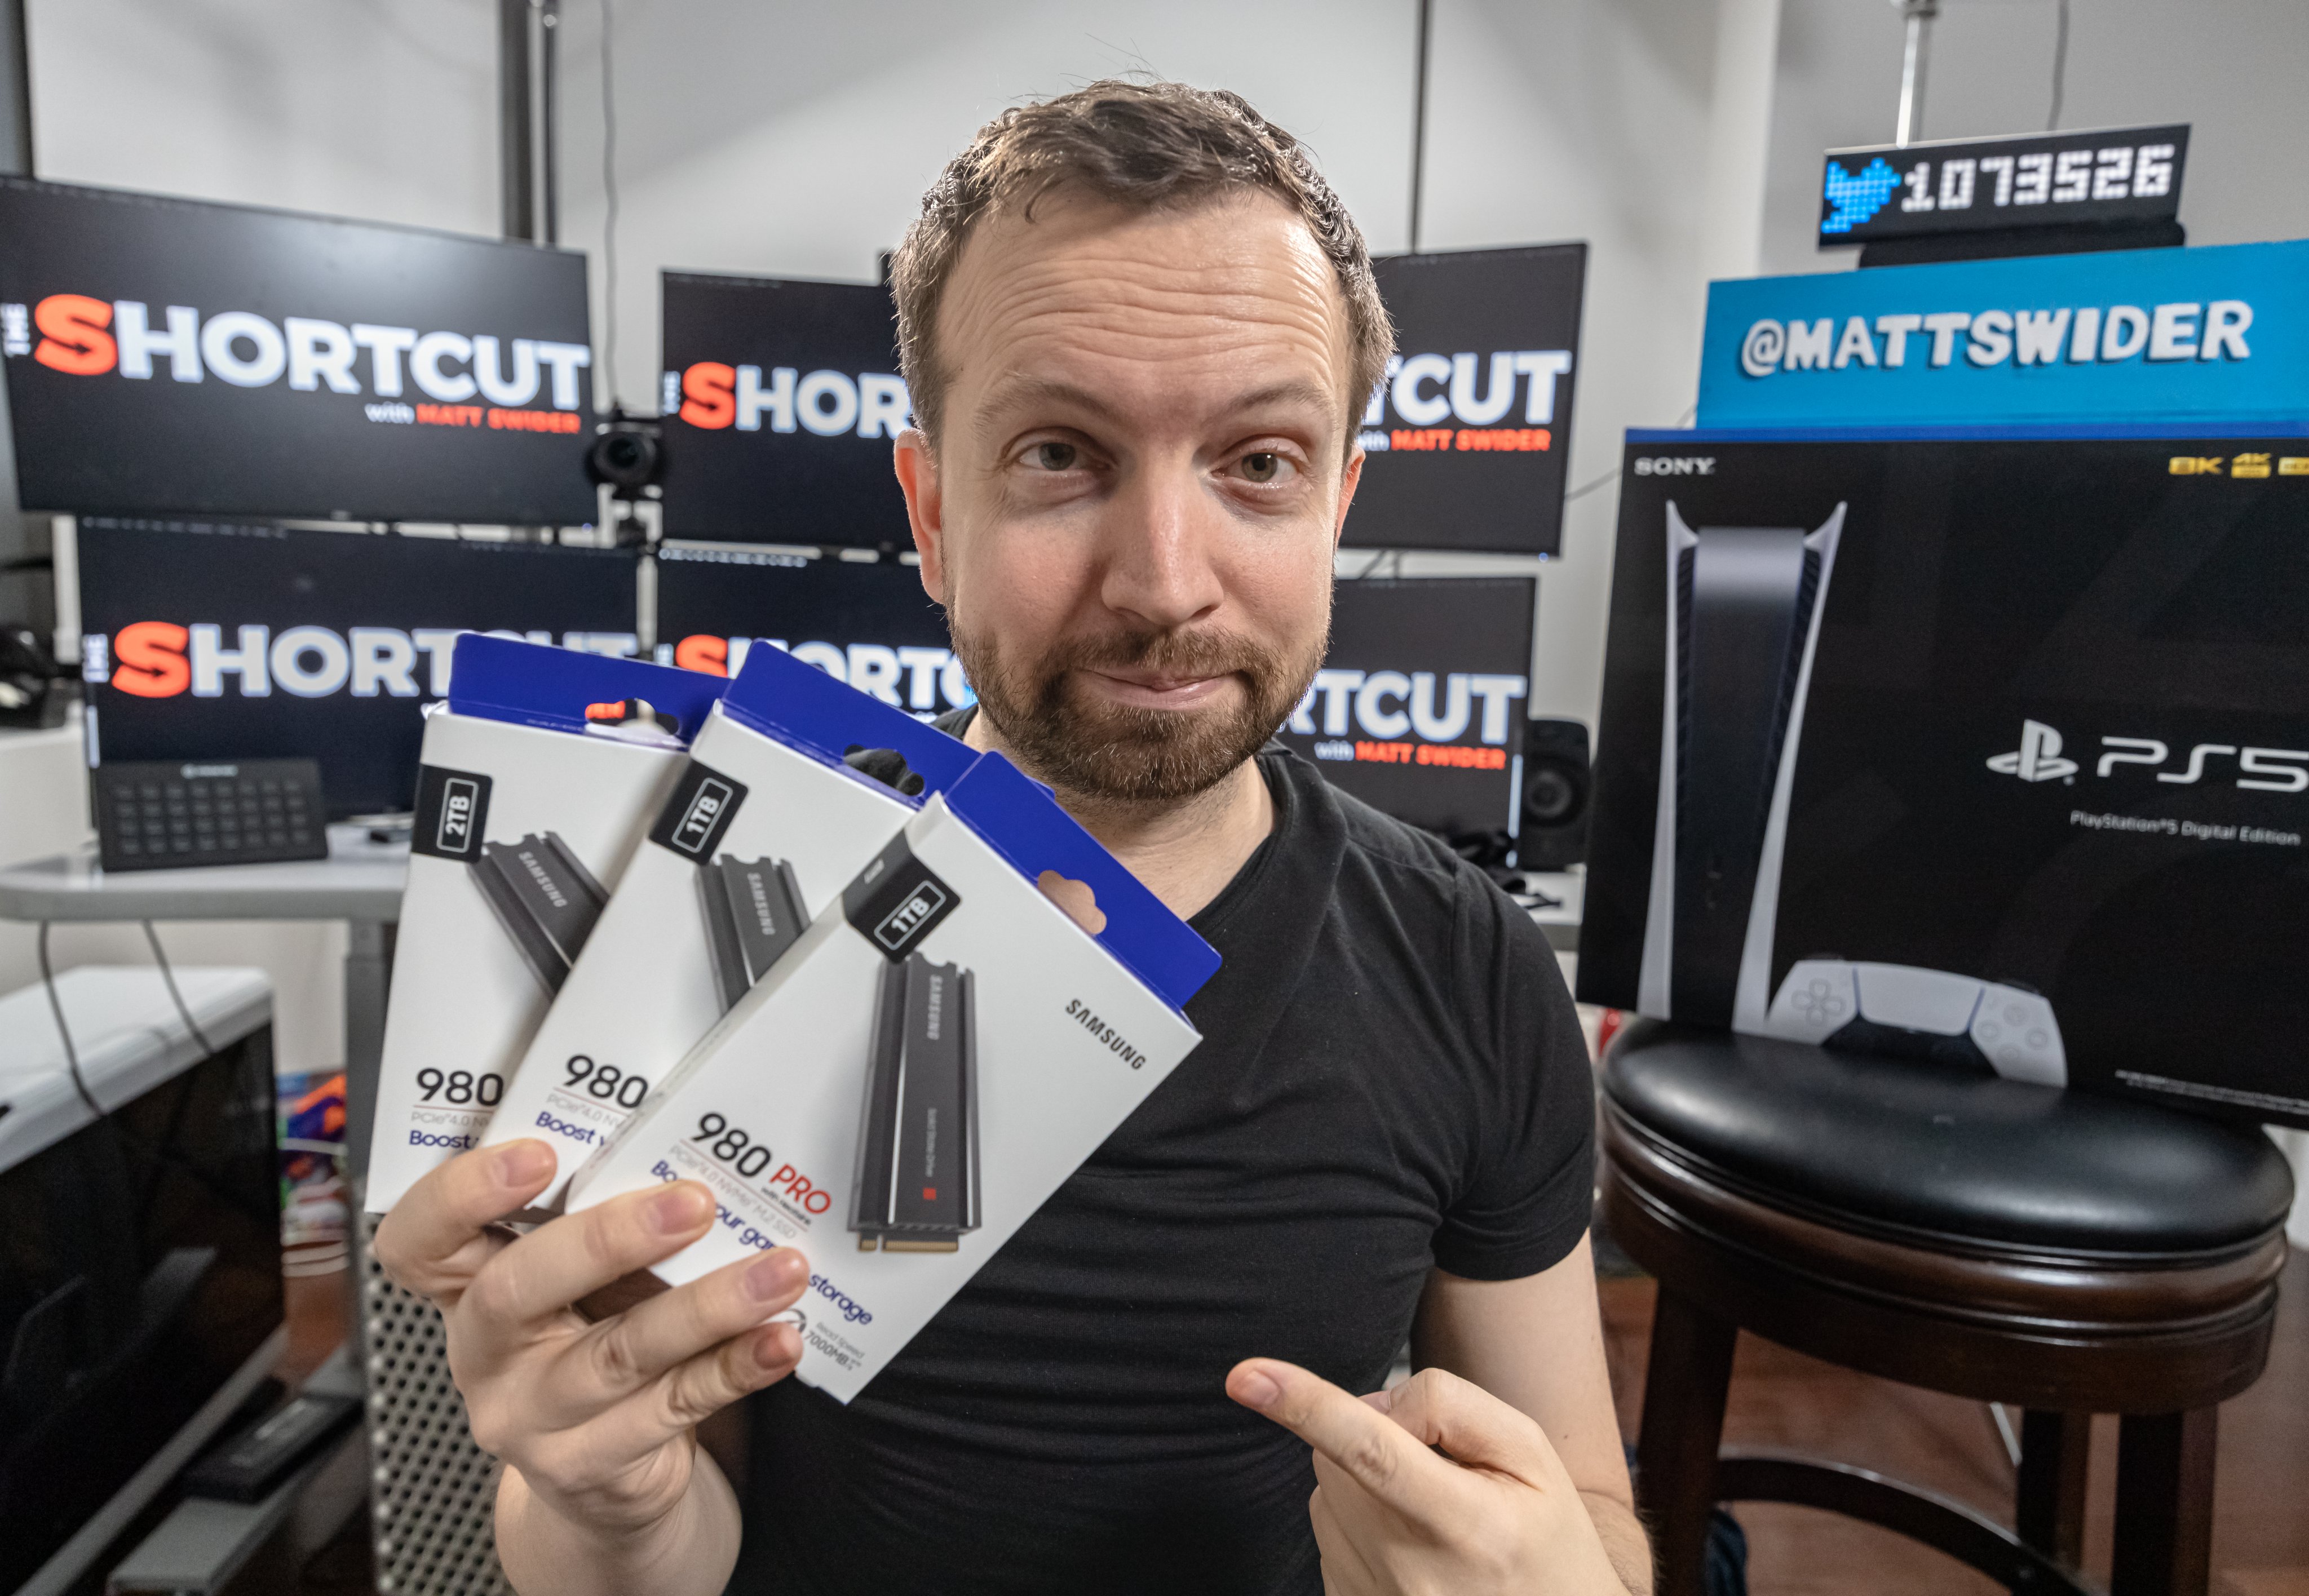 Matt Swider (once-a-day tech deals @ The Shortcut) on X: Thank you, 1M  Twitter followers and  subscribers (FREE or paid  really helps me). In April, I'm giving away: ✓PS5 Digital ✓3